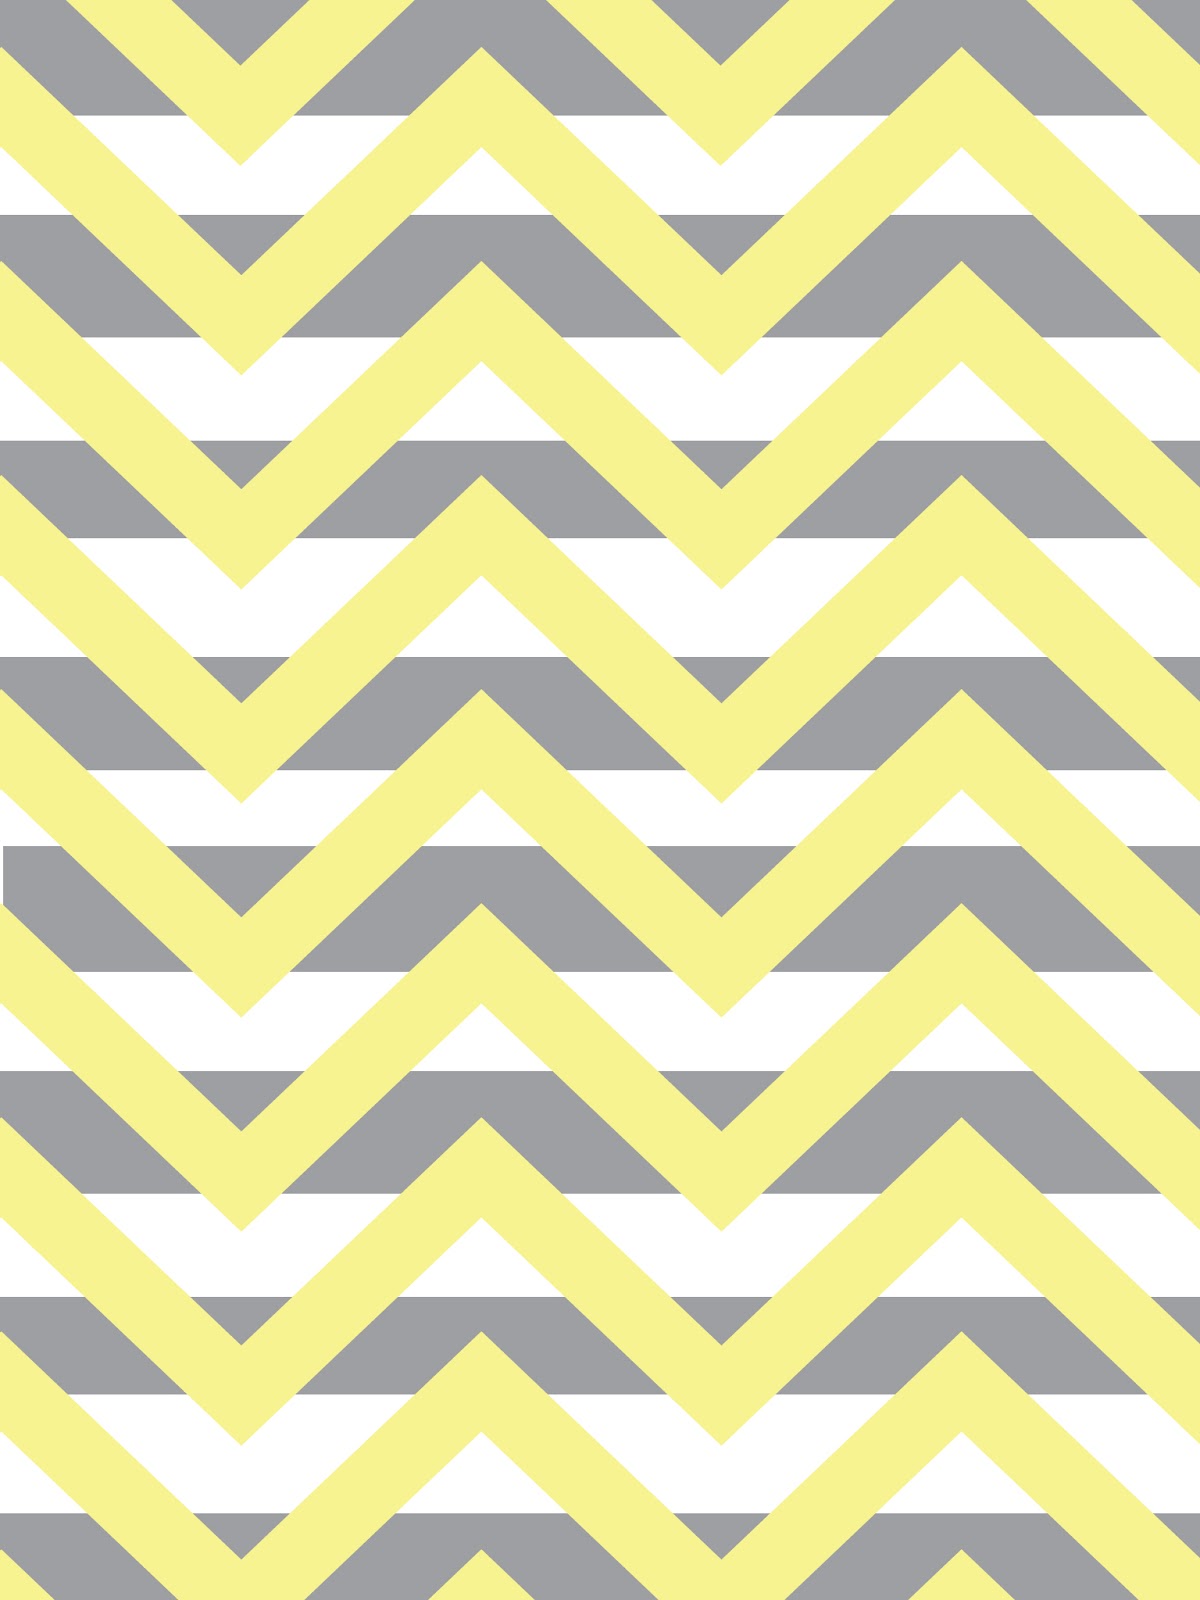 ... it...Create--Printables & Backgrounds / Wallpapers : Striped Chevron